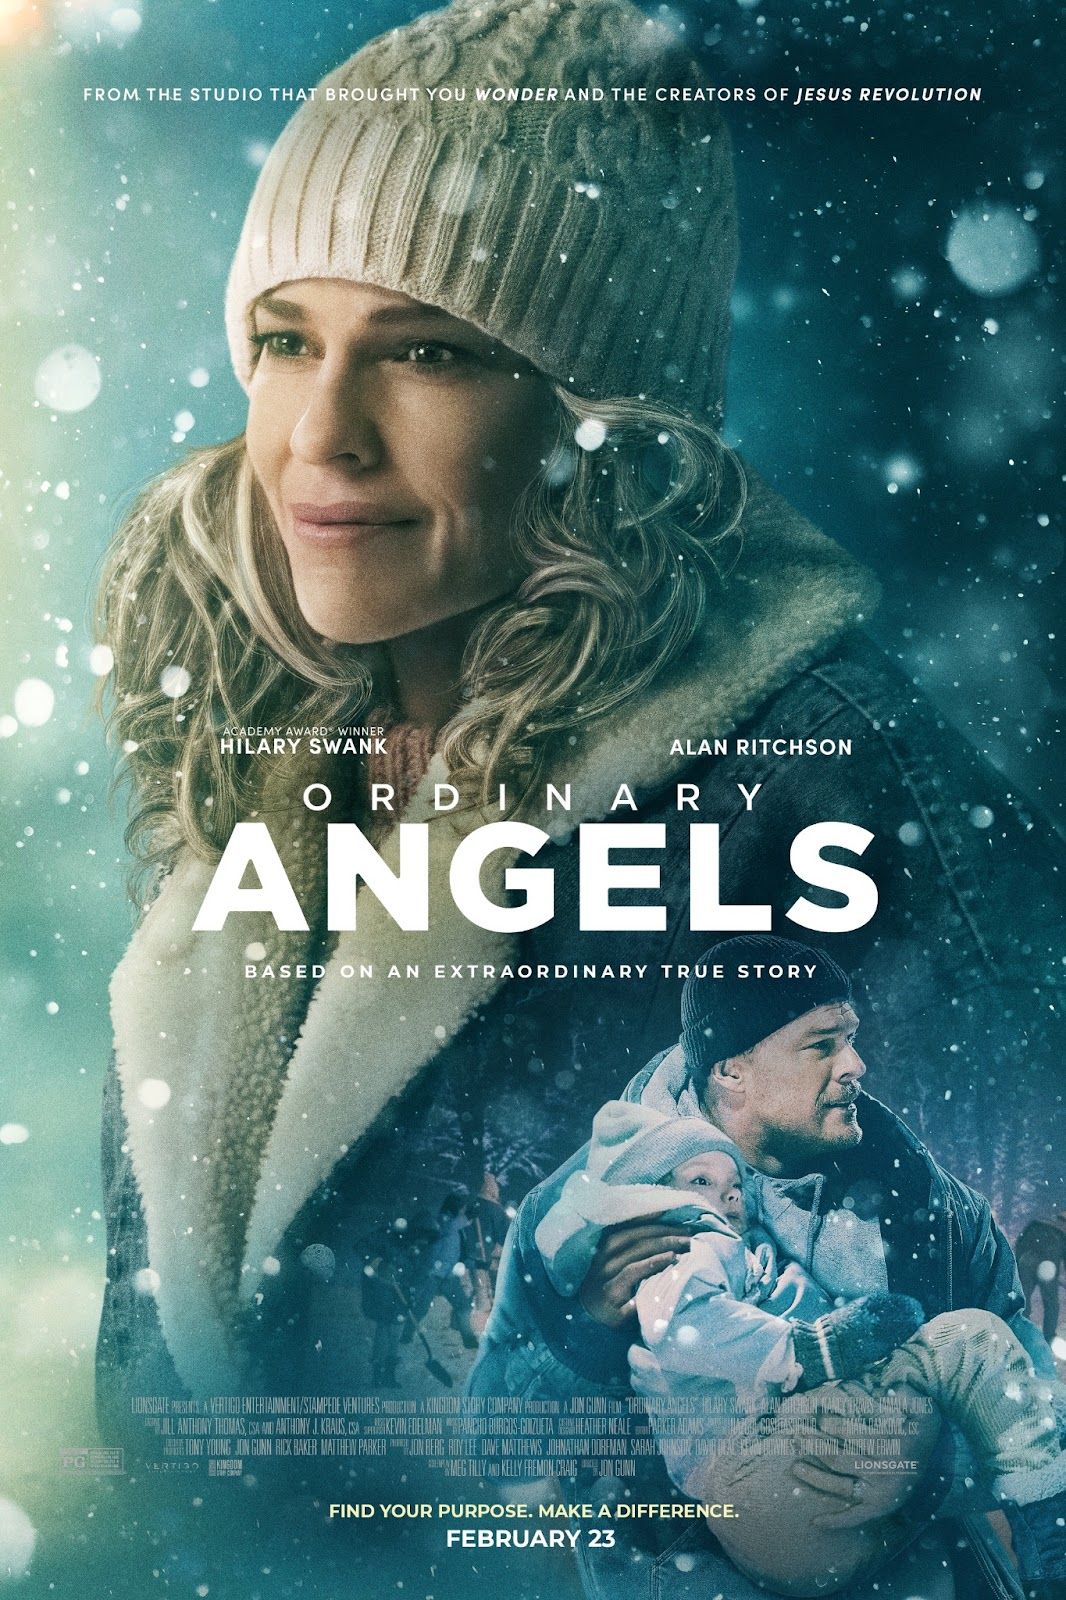 Ordinary Angels Movie Poster With Hilary Swank and Alan Ritchman